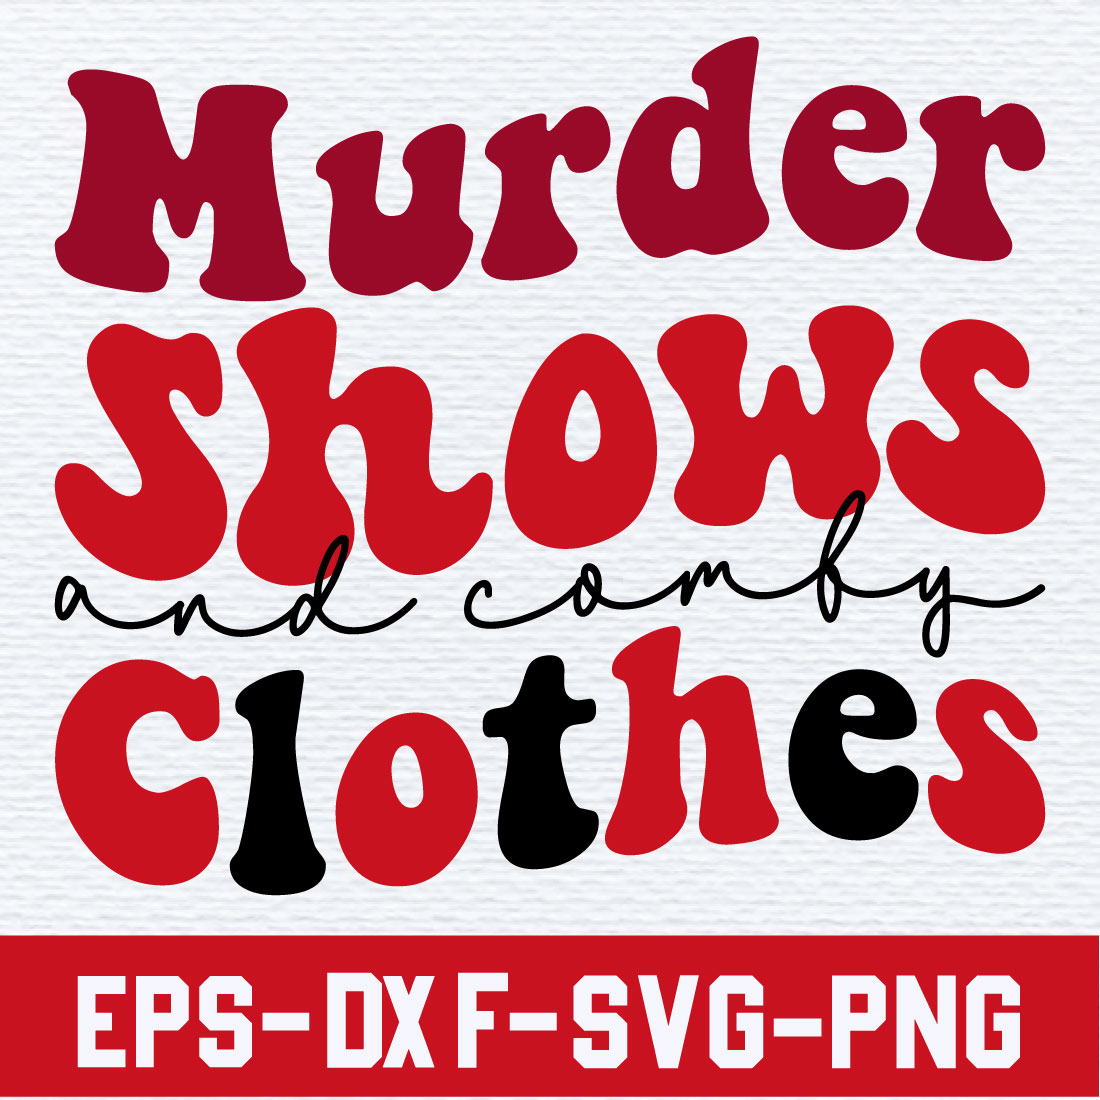 Murder shows and comfy clothes preview image.